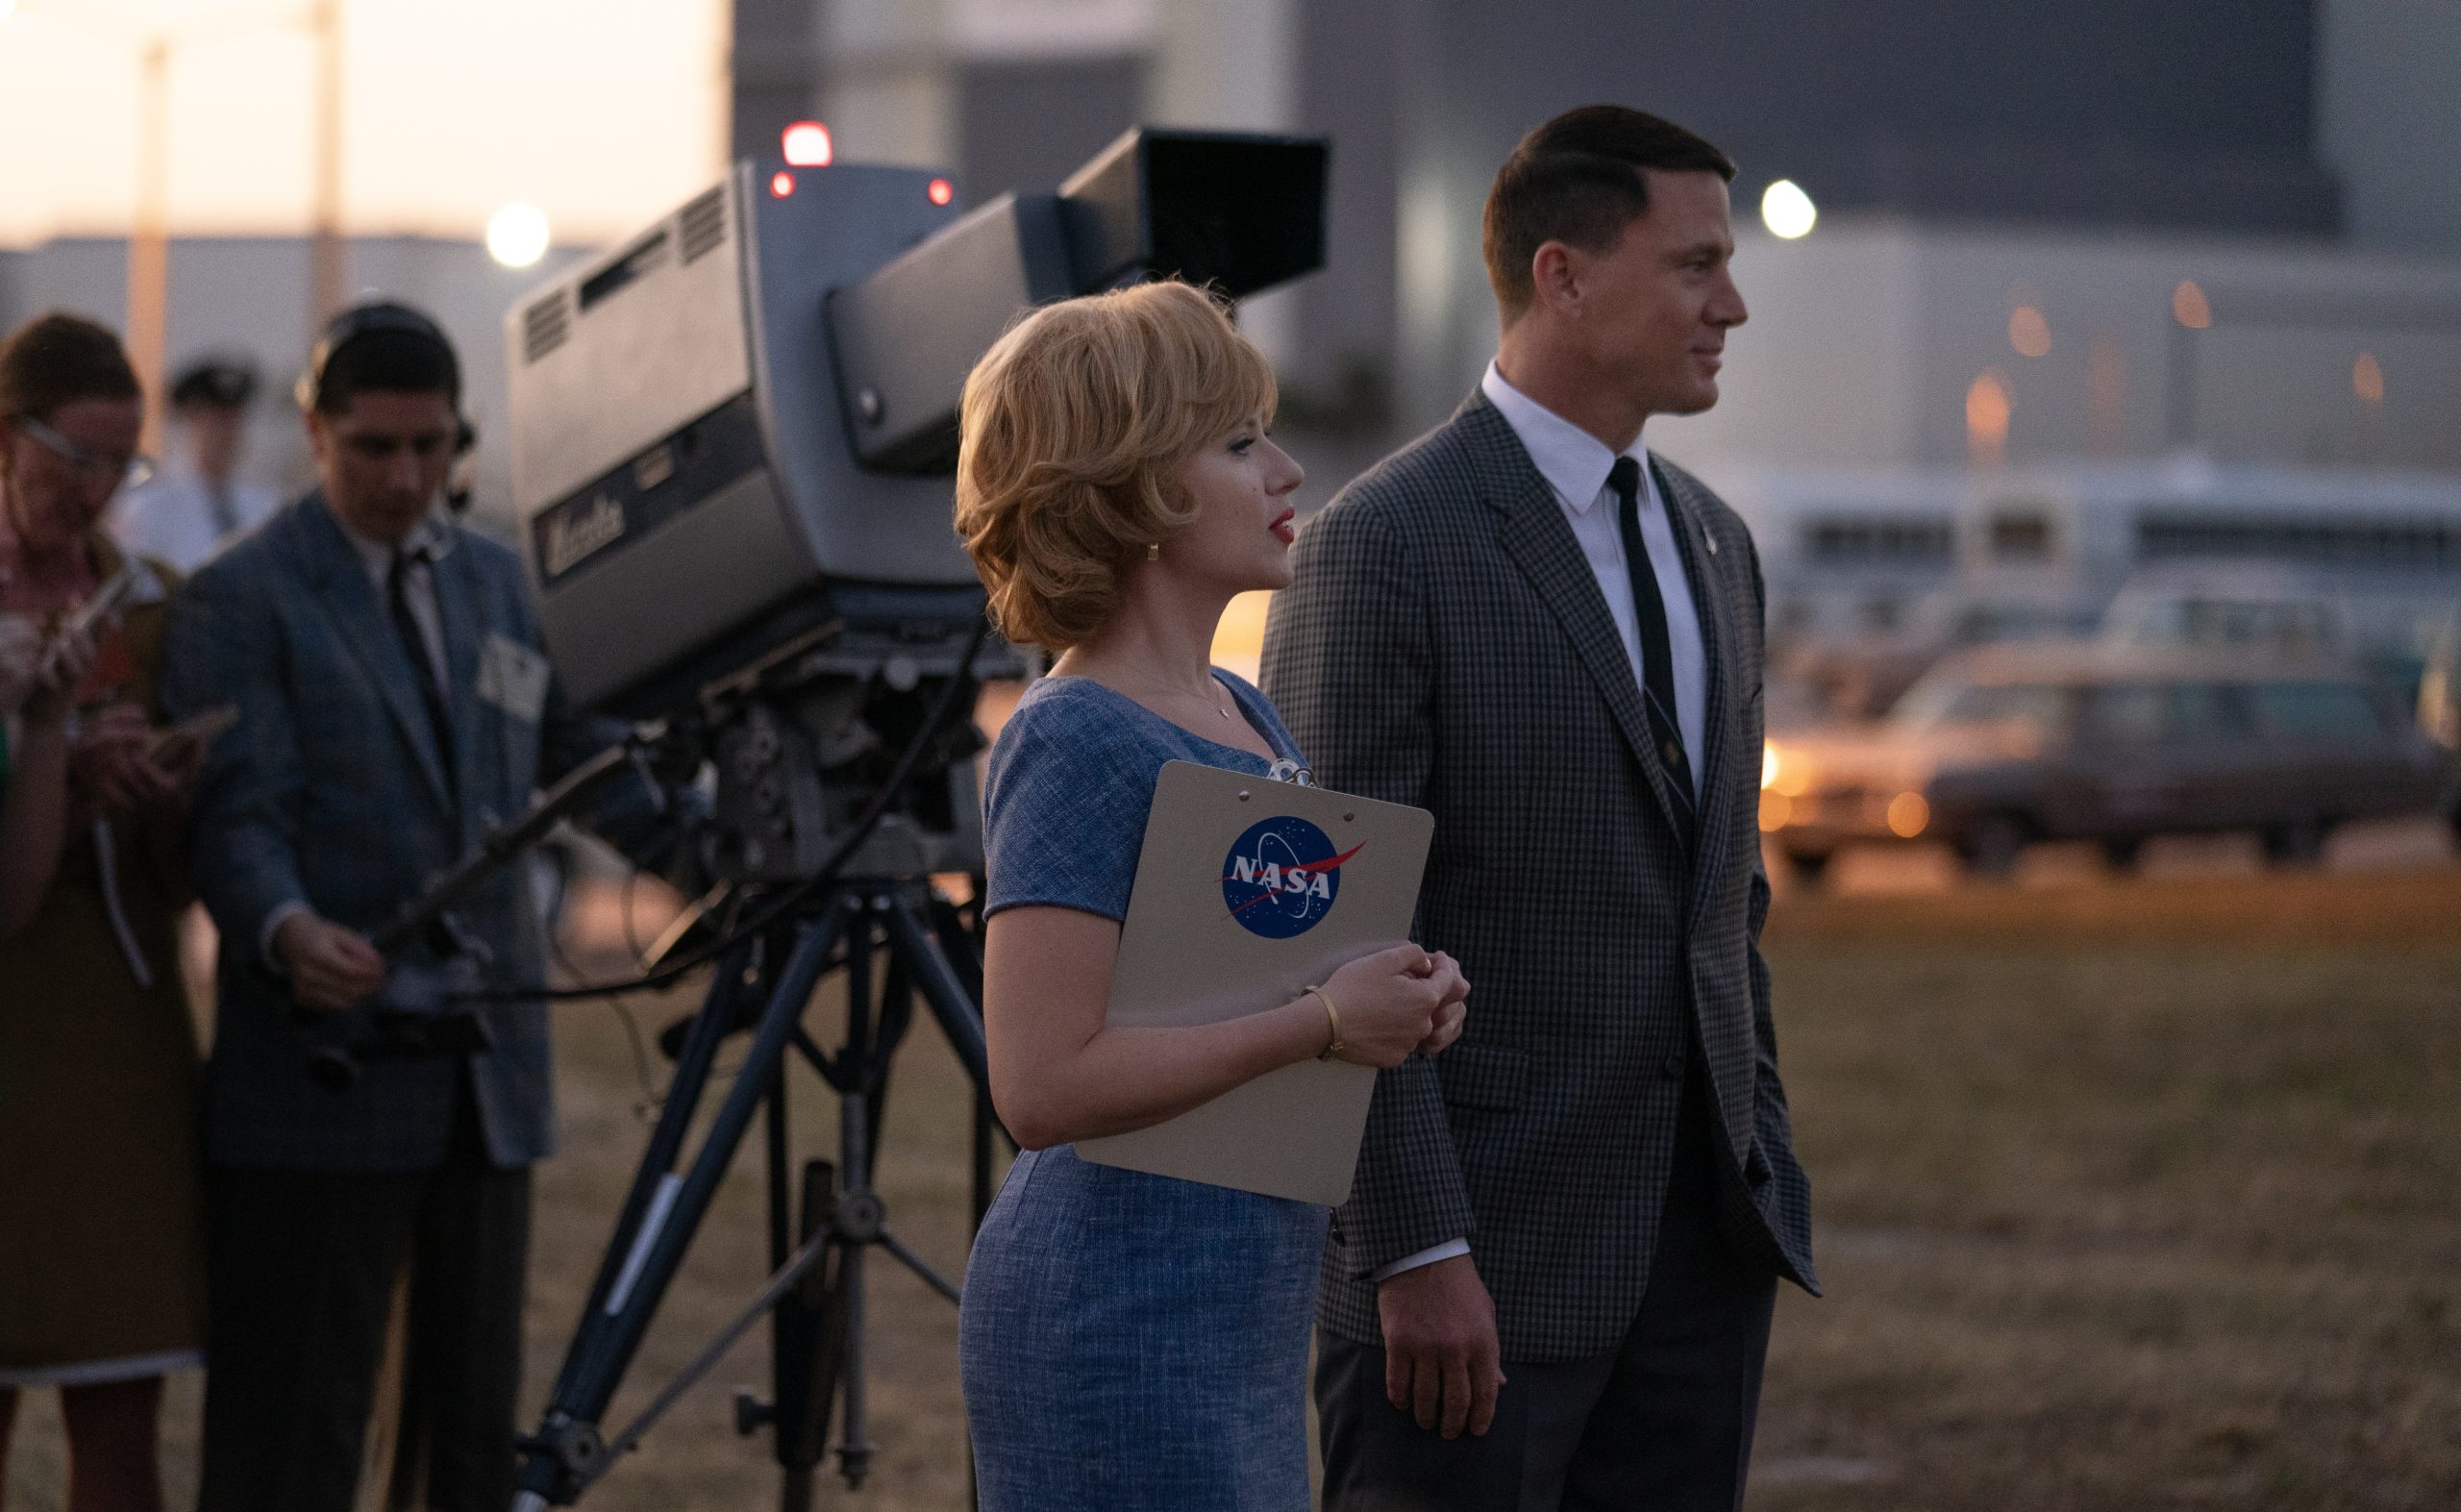 Fly Me to the Moon: Scarlett Johansson Shines in Space-Age Rom Com [Video]